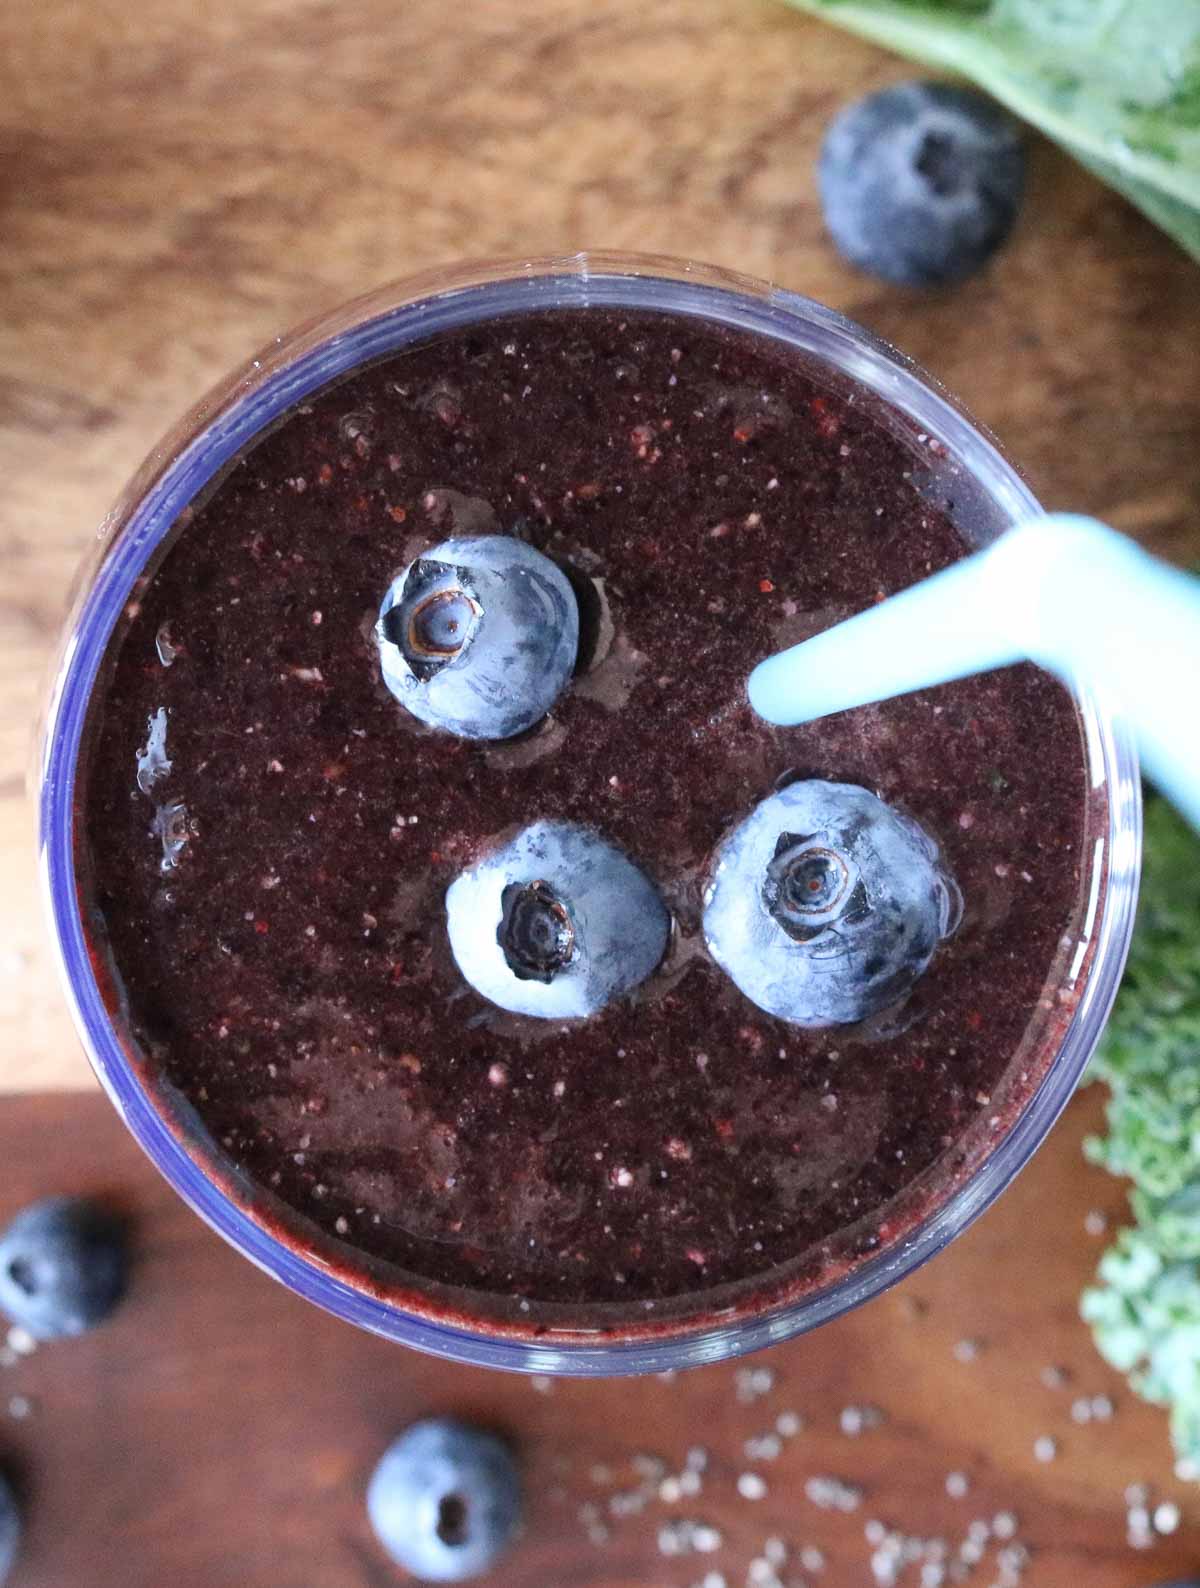 Overhead shot of a glass of blueberry kale smoothie.